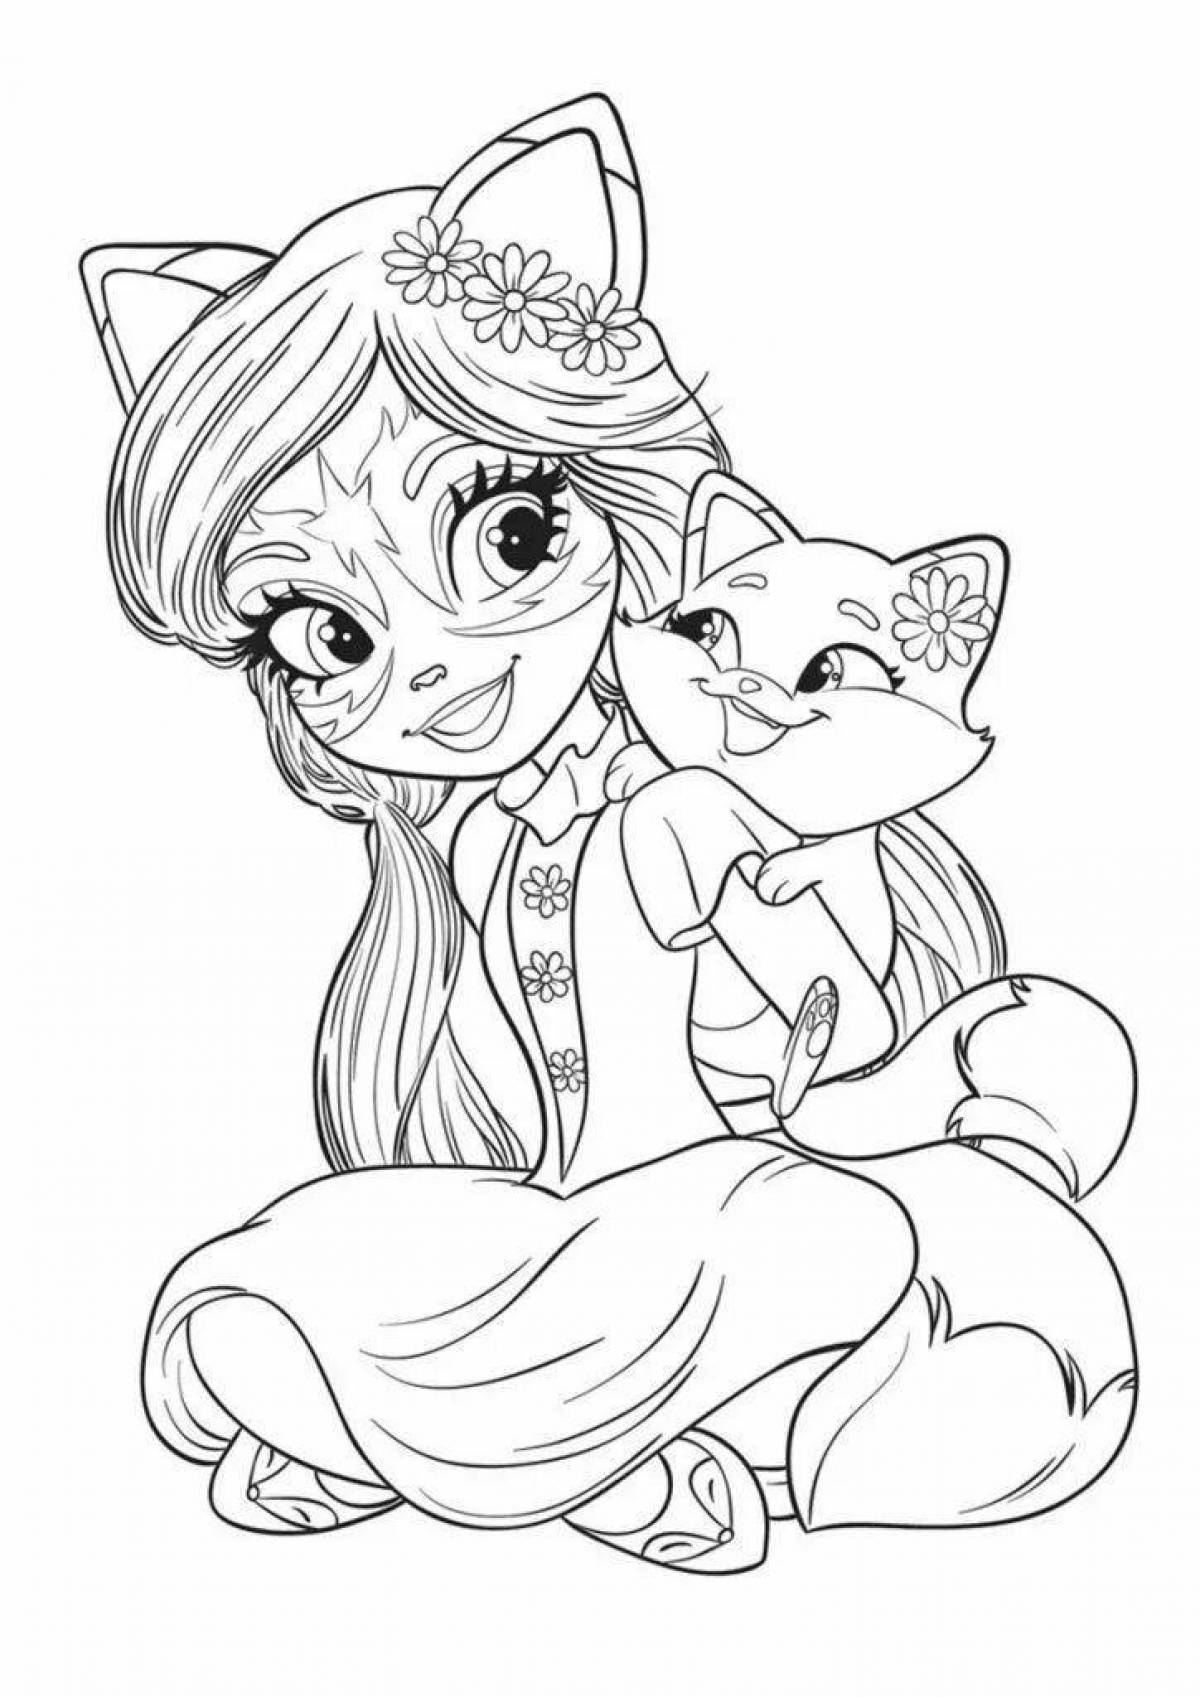 Enchenchimals adorable coloring pages